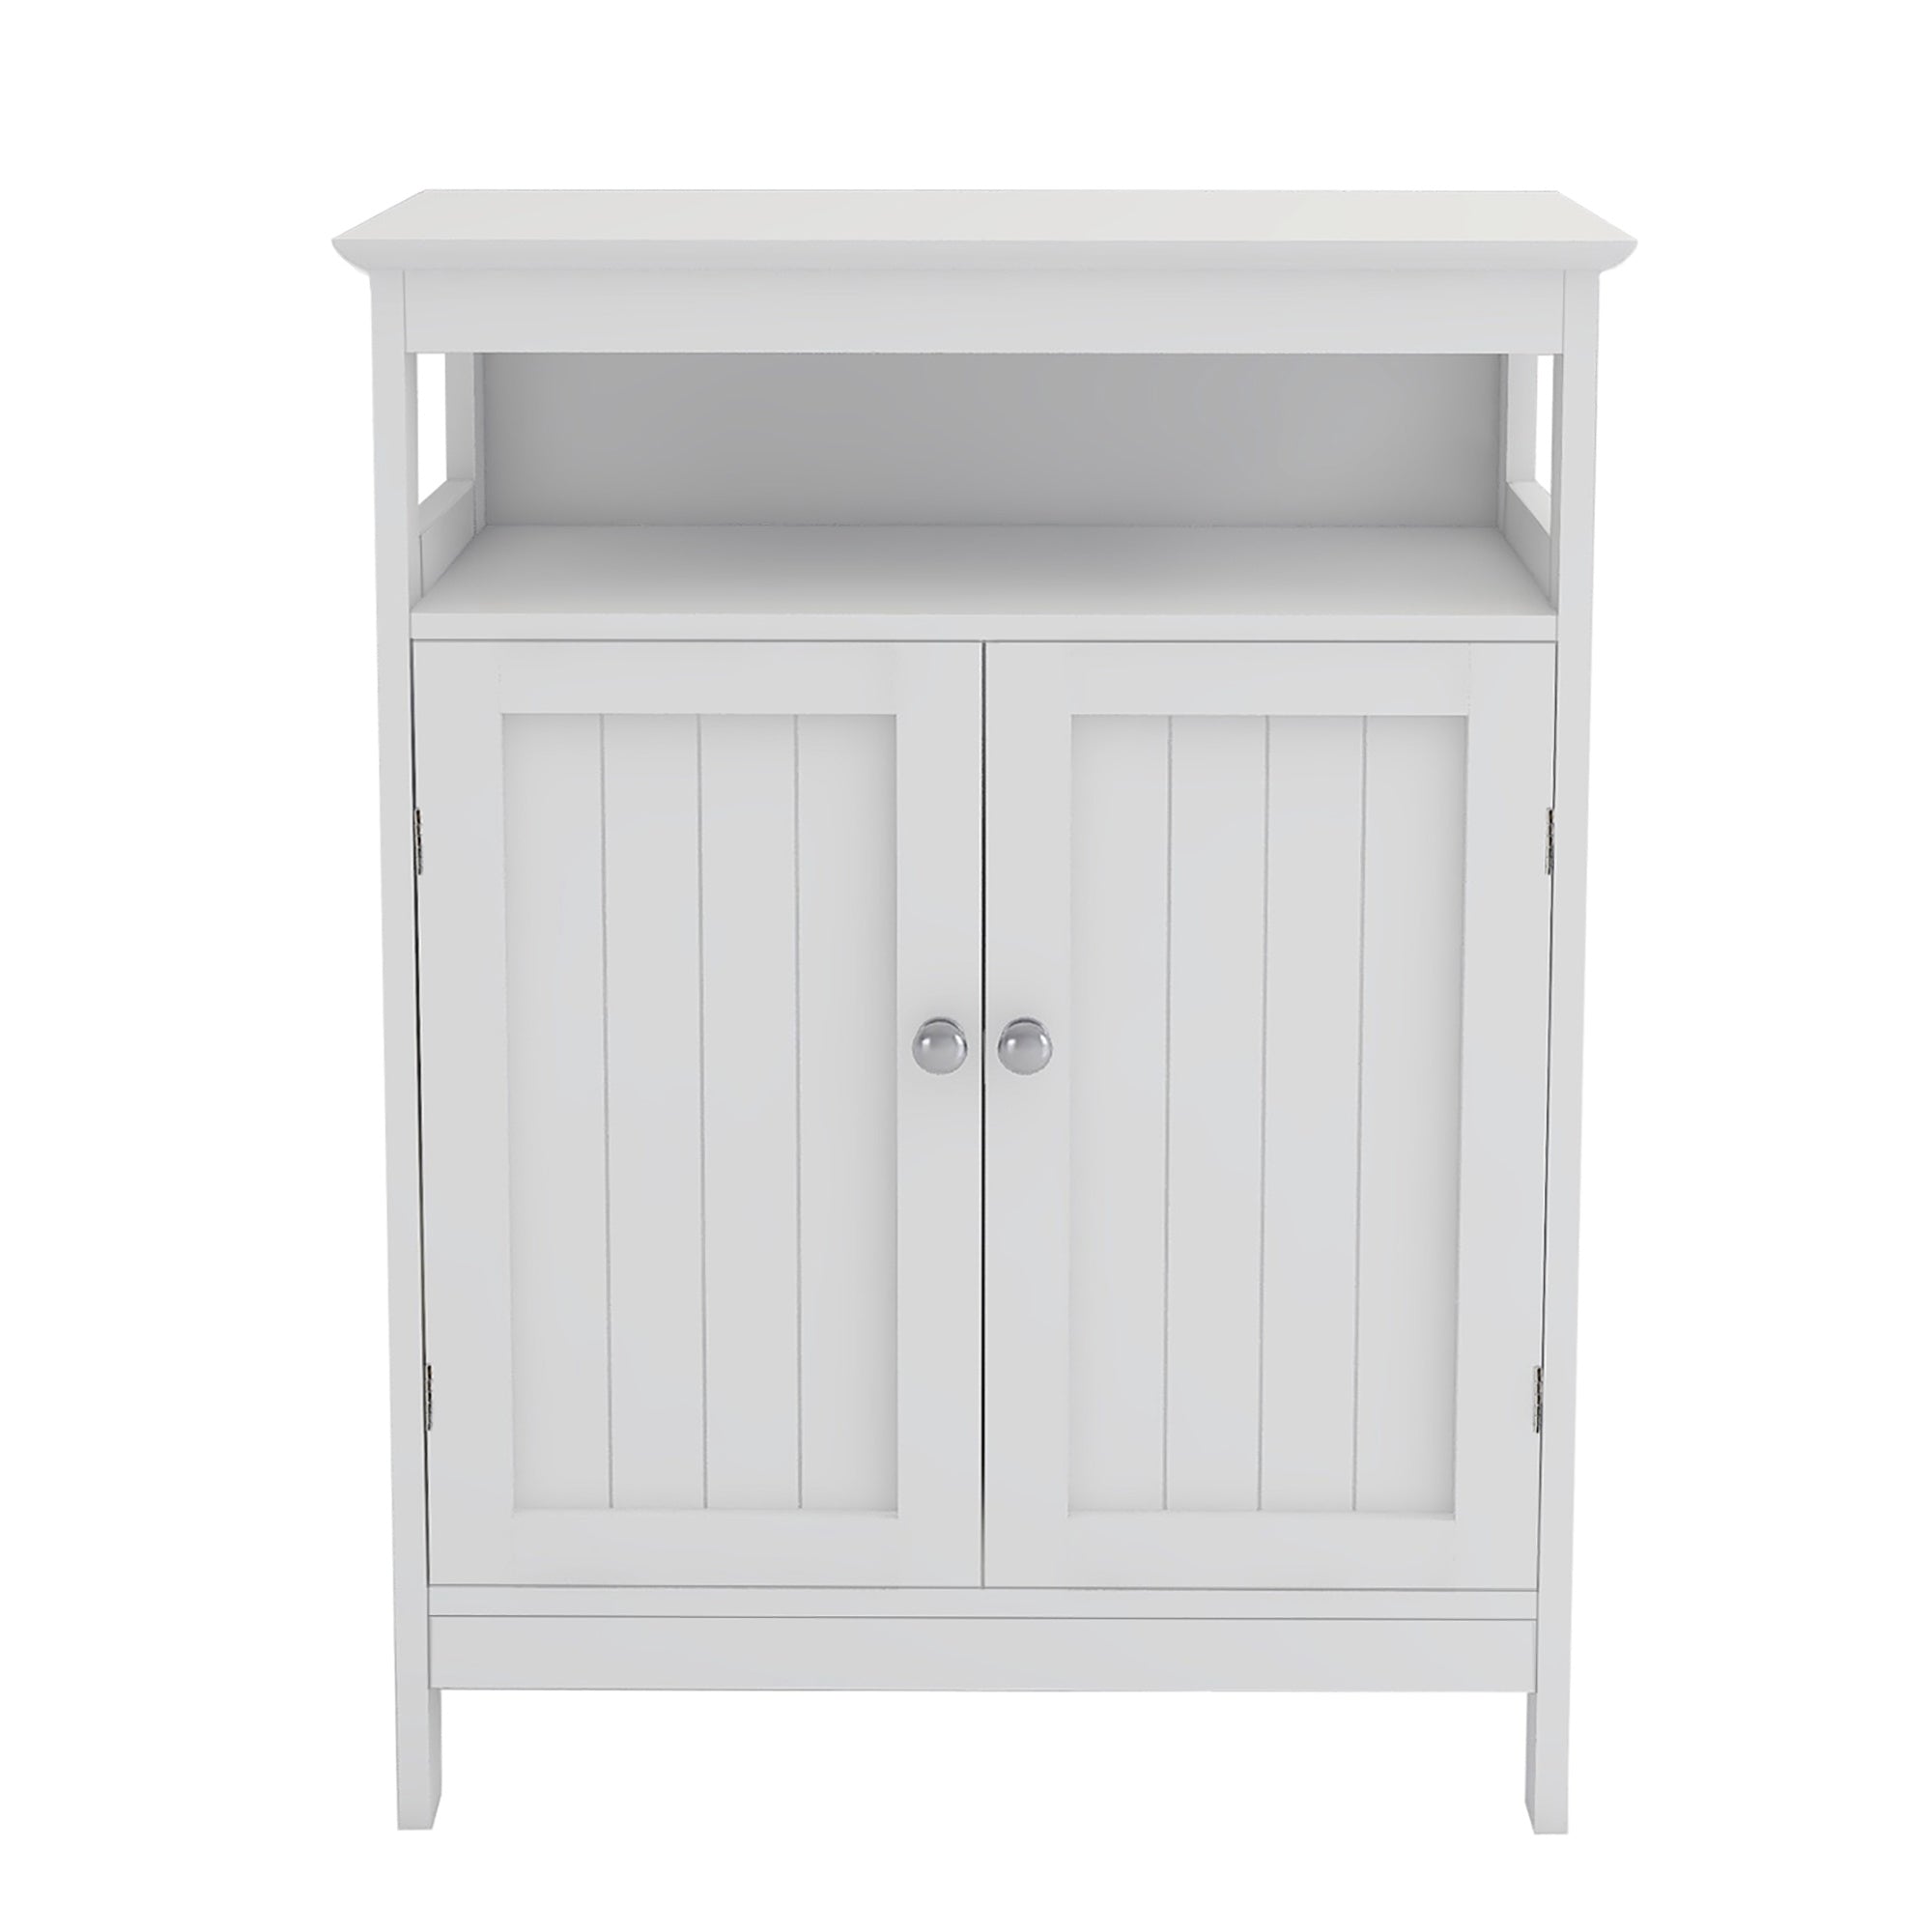 Free shipping Home Bathroom Floor Cabinet with Double Shutter Doors and Adjustable Shelves, Freestanding Bathroom Storage Cabinet with Adjustable Shelf